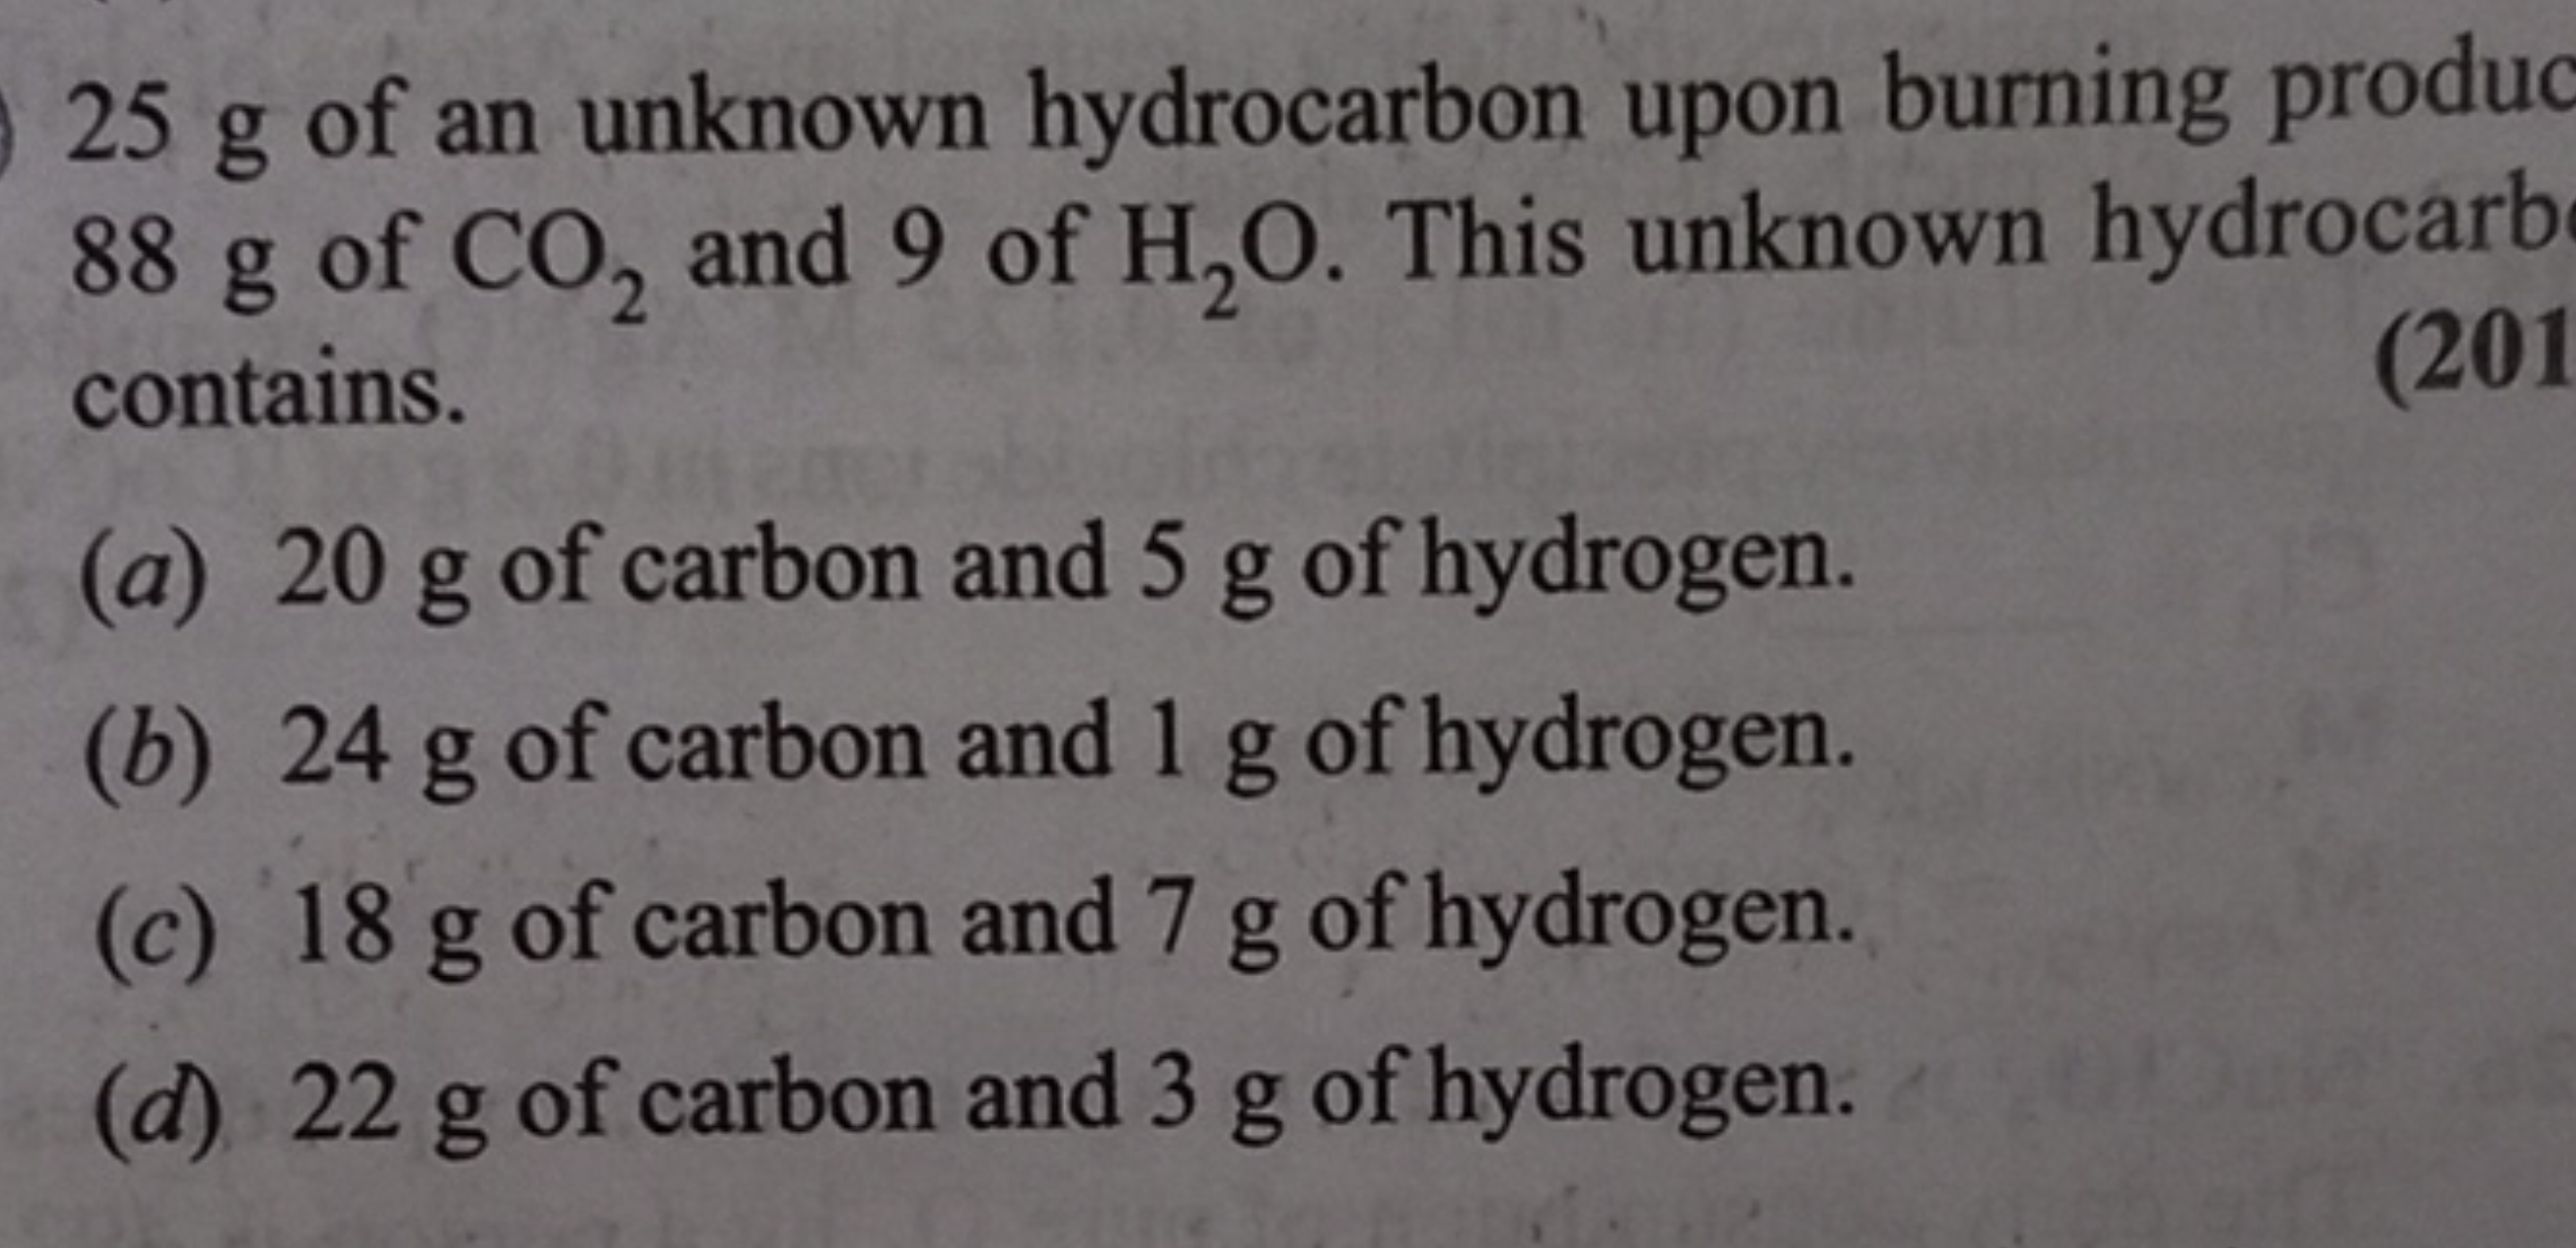 25 g of an unknown hydrocarbon upon burning produc 88 g of CO2​ and 9 